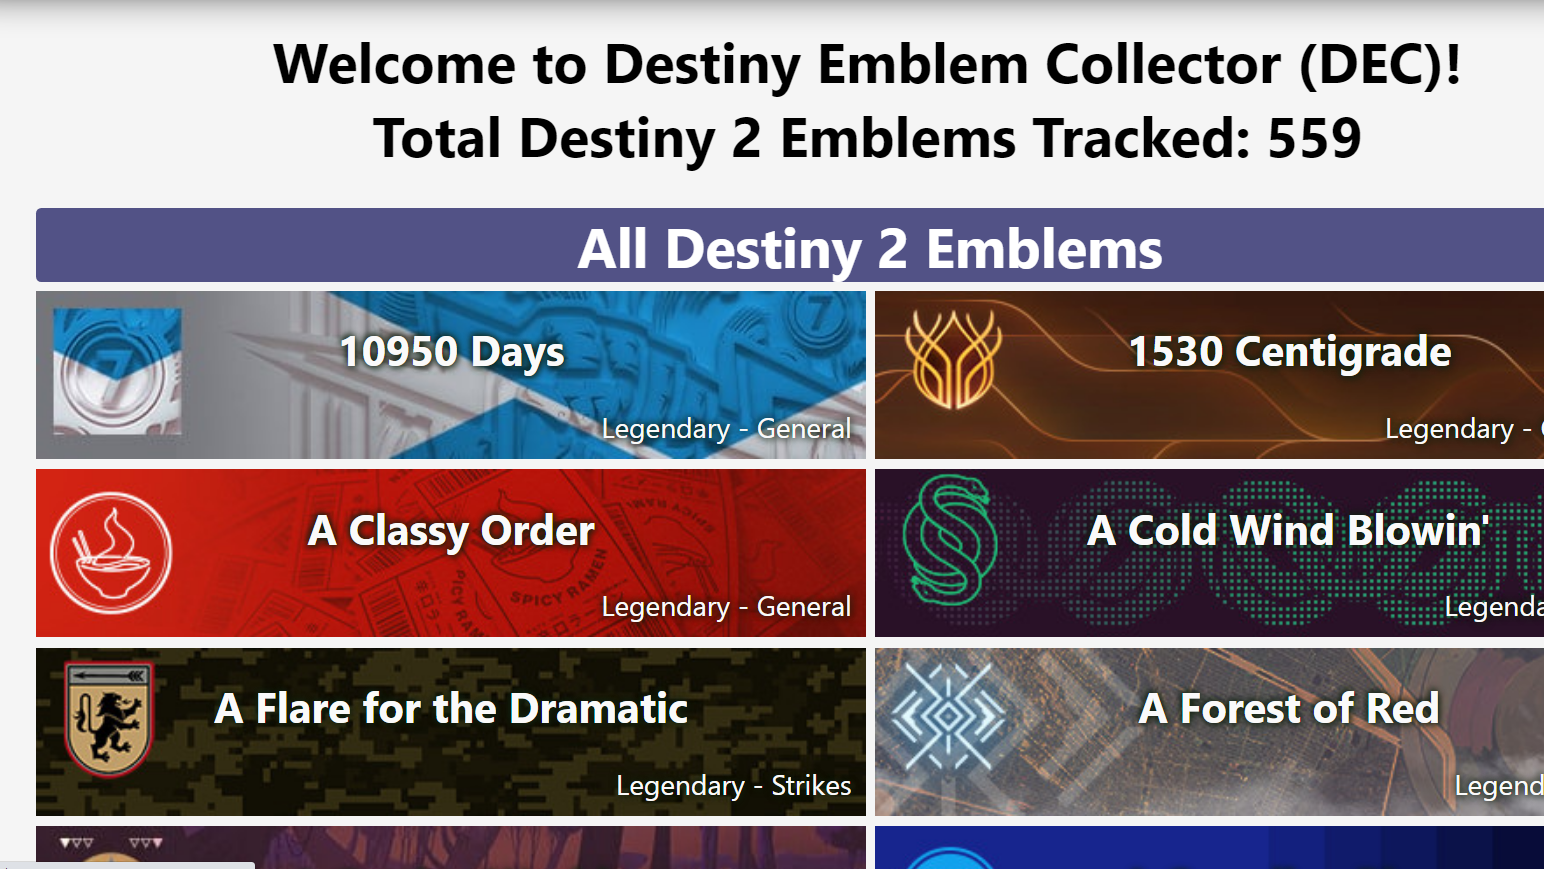 Destinyemblemcollector.com is one of the sites that tracks new emblems added to the game using Destiny 2's API.  (Screenshot: DestinyEmblemCollector.com / Kotaku)